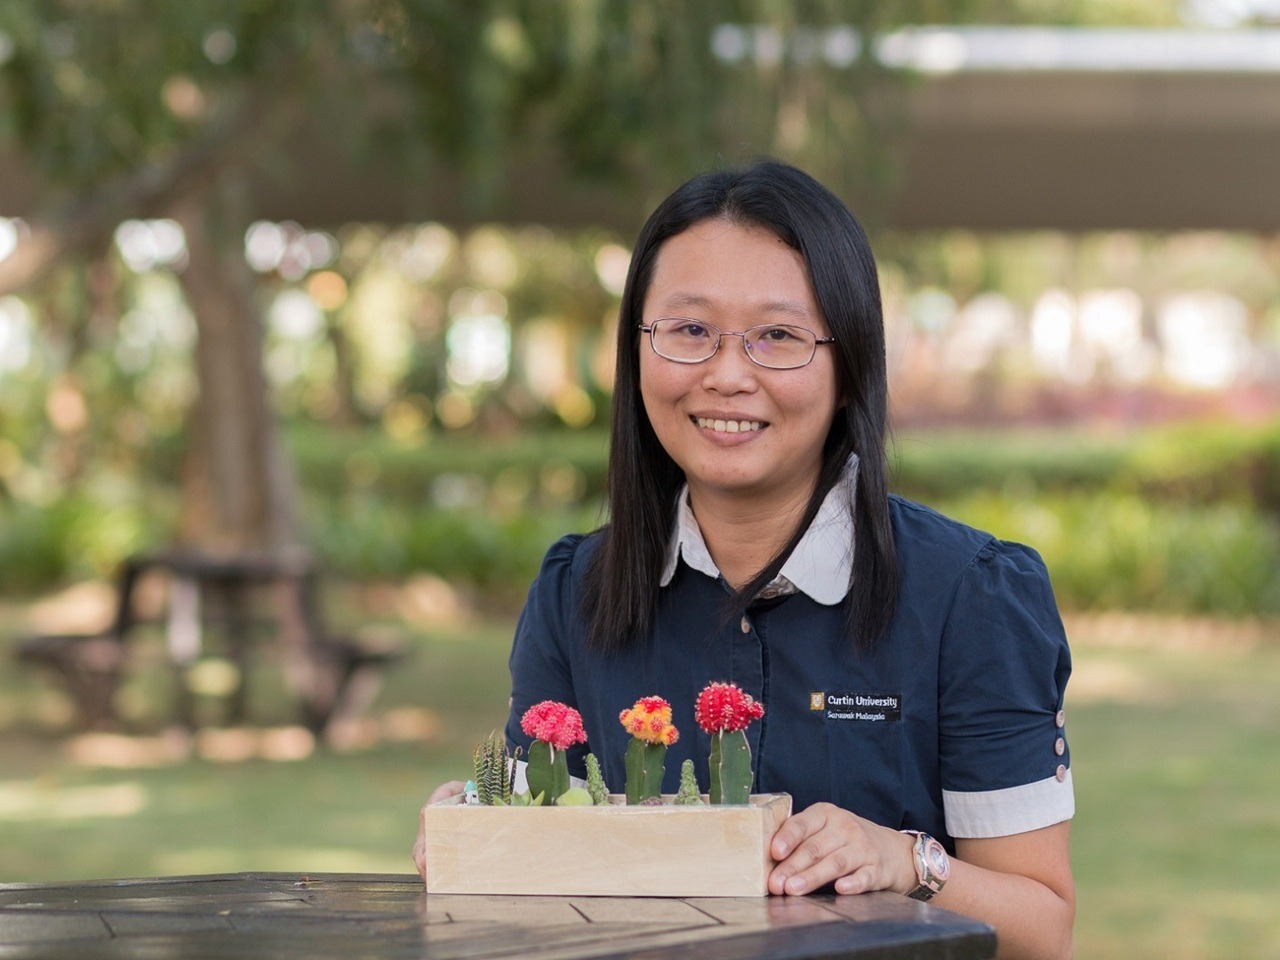 “I really enjoy the scenery at the Curtin Malaysia campus, especially the greenery and lakes surrounding it. As a nature lover, I also keep little pots of succulents and cacti at my workstation. Besides looking adorable, they help purify the air and...